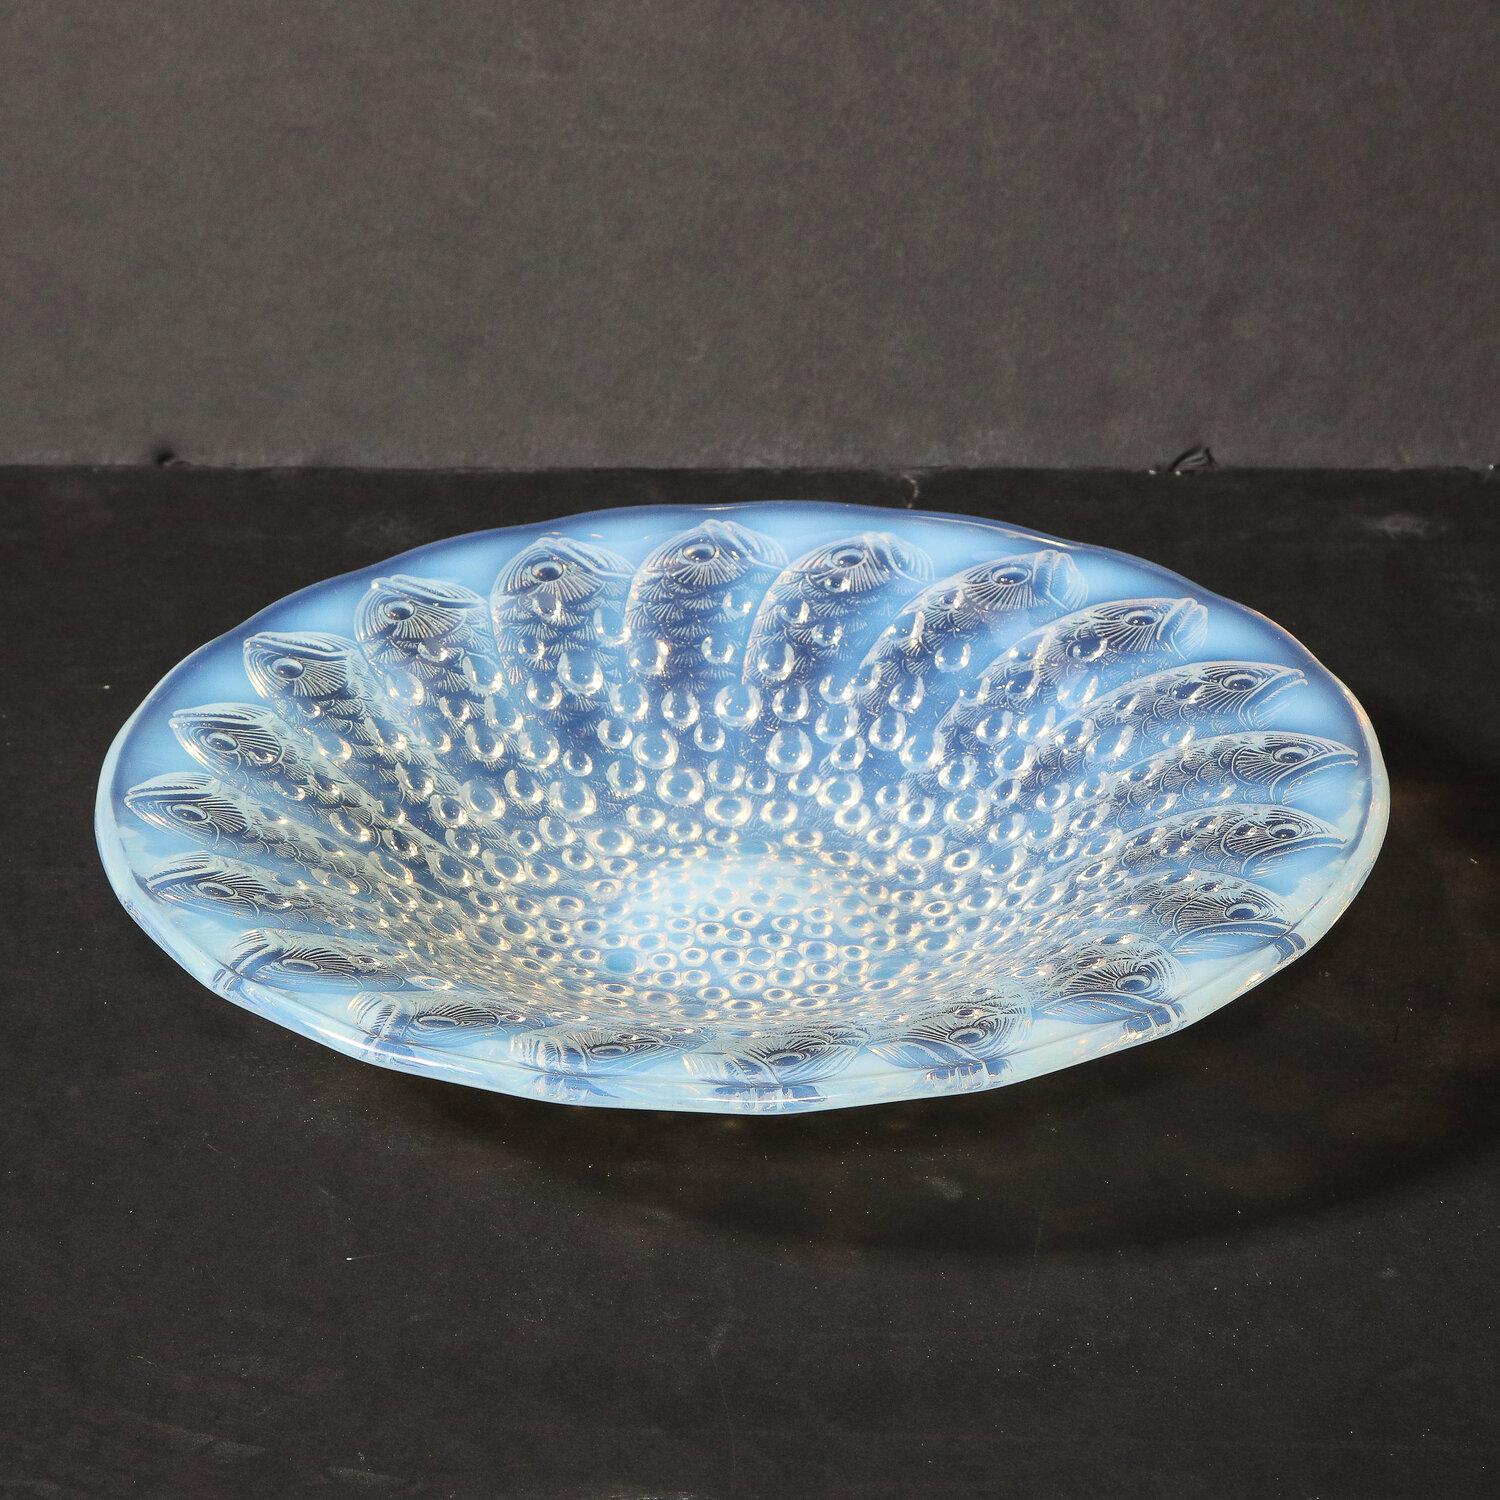 Art Deco Opalescent Glass Center Bowl with Repeating Fish Motif by Lalique For Sale 9